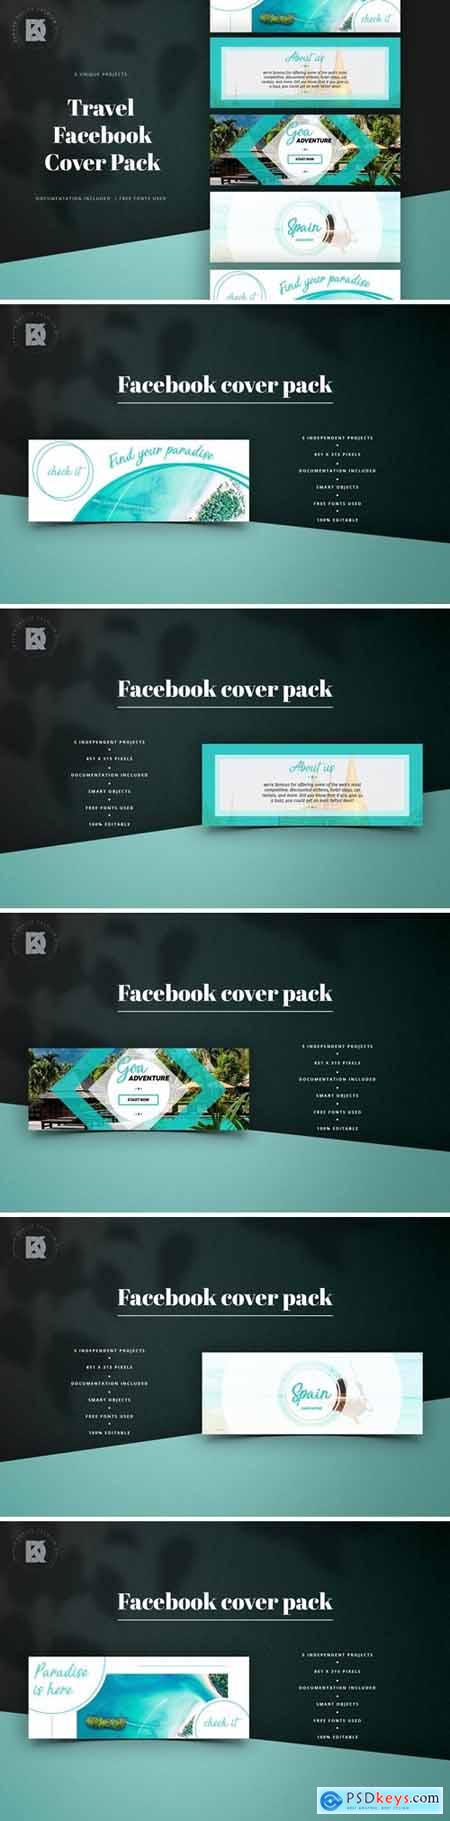 Travel Facebook Cover Pack